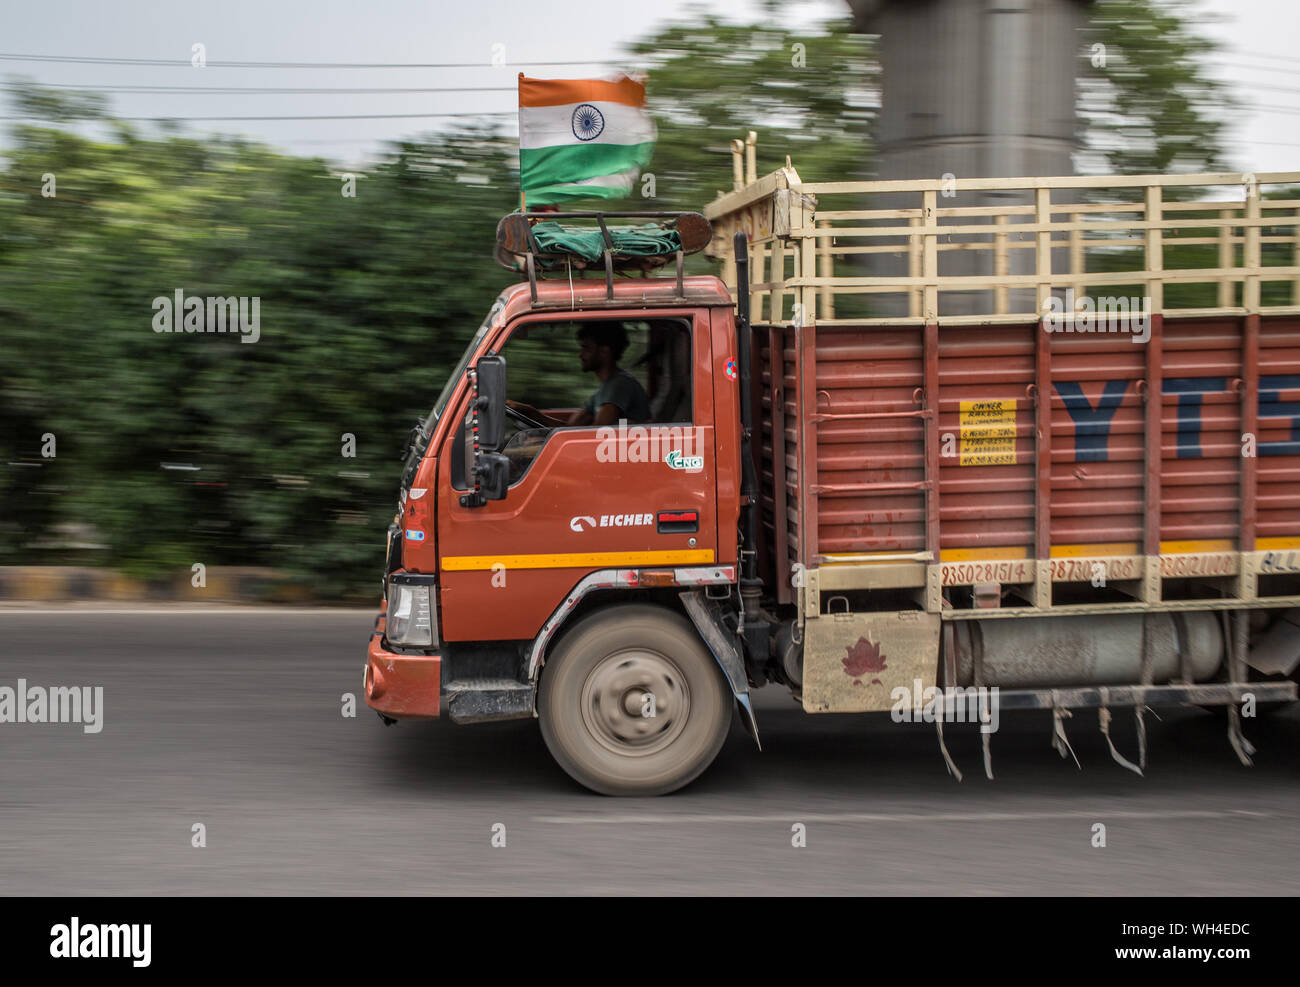 A truck with a Indian flag speeding down a road in Gurgaon, India. Stock Photo